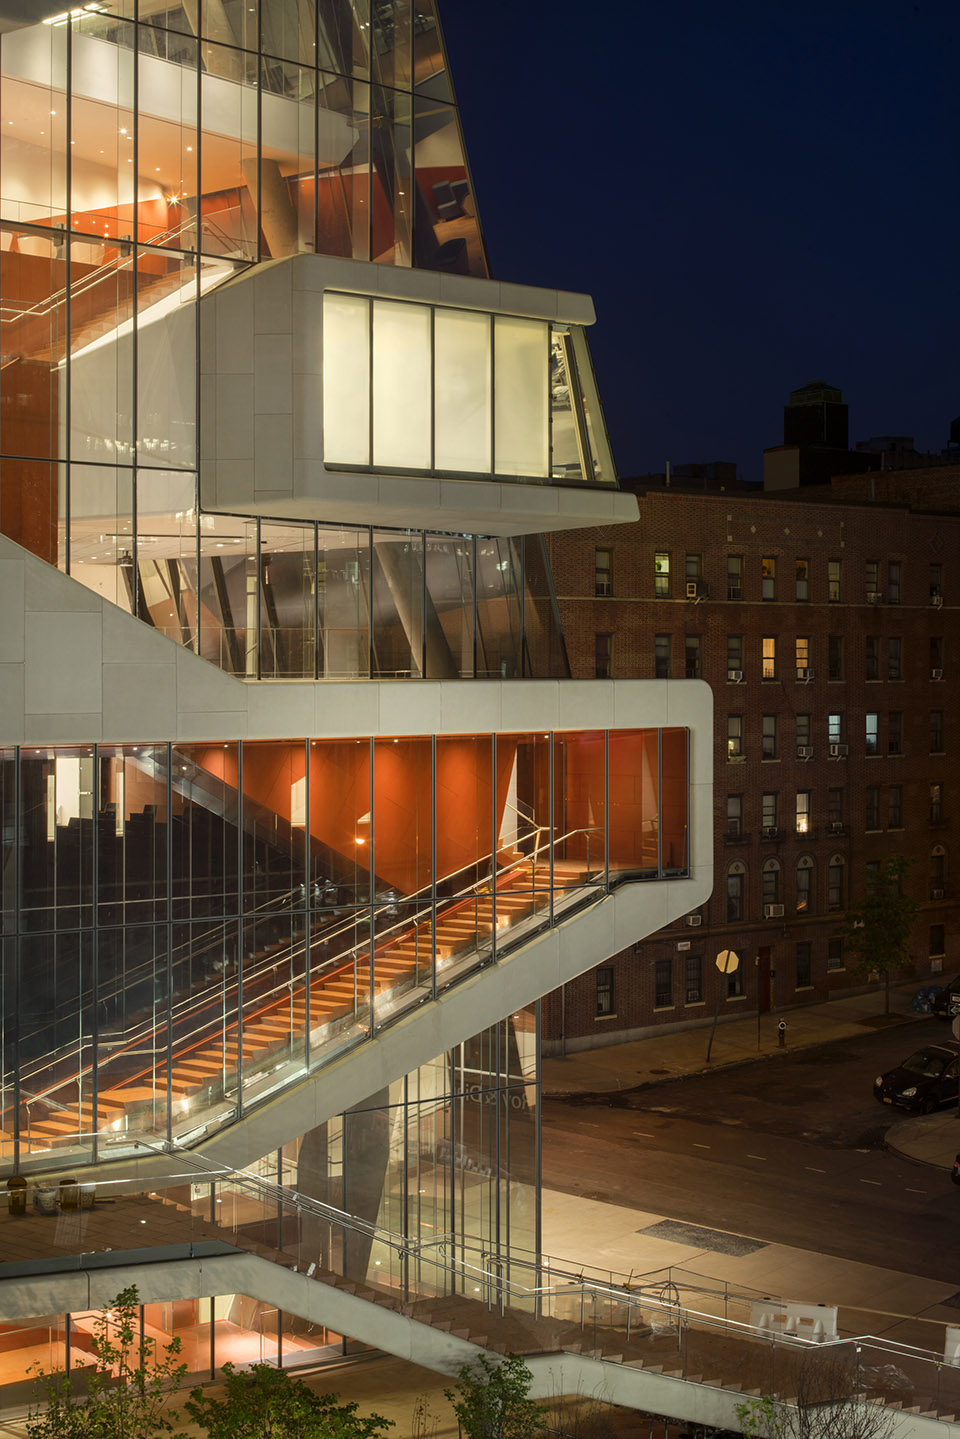 008-The-Roy-and-Diana-Vagelos-Education-Center-at-Columbia-University-by-Diller-.jpg